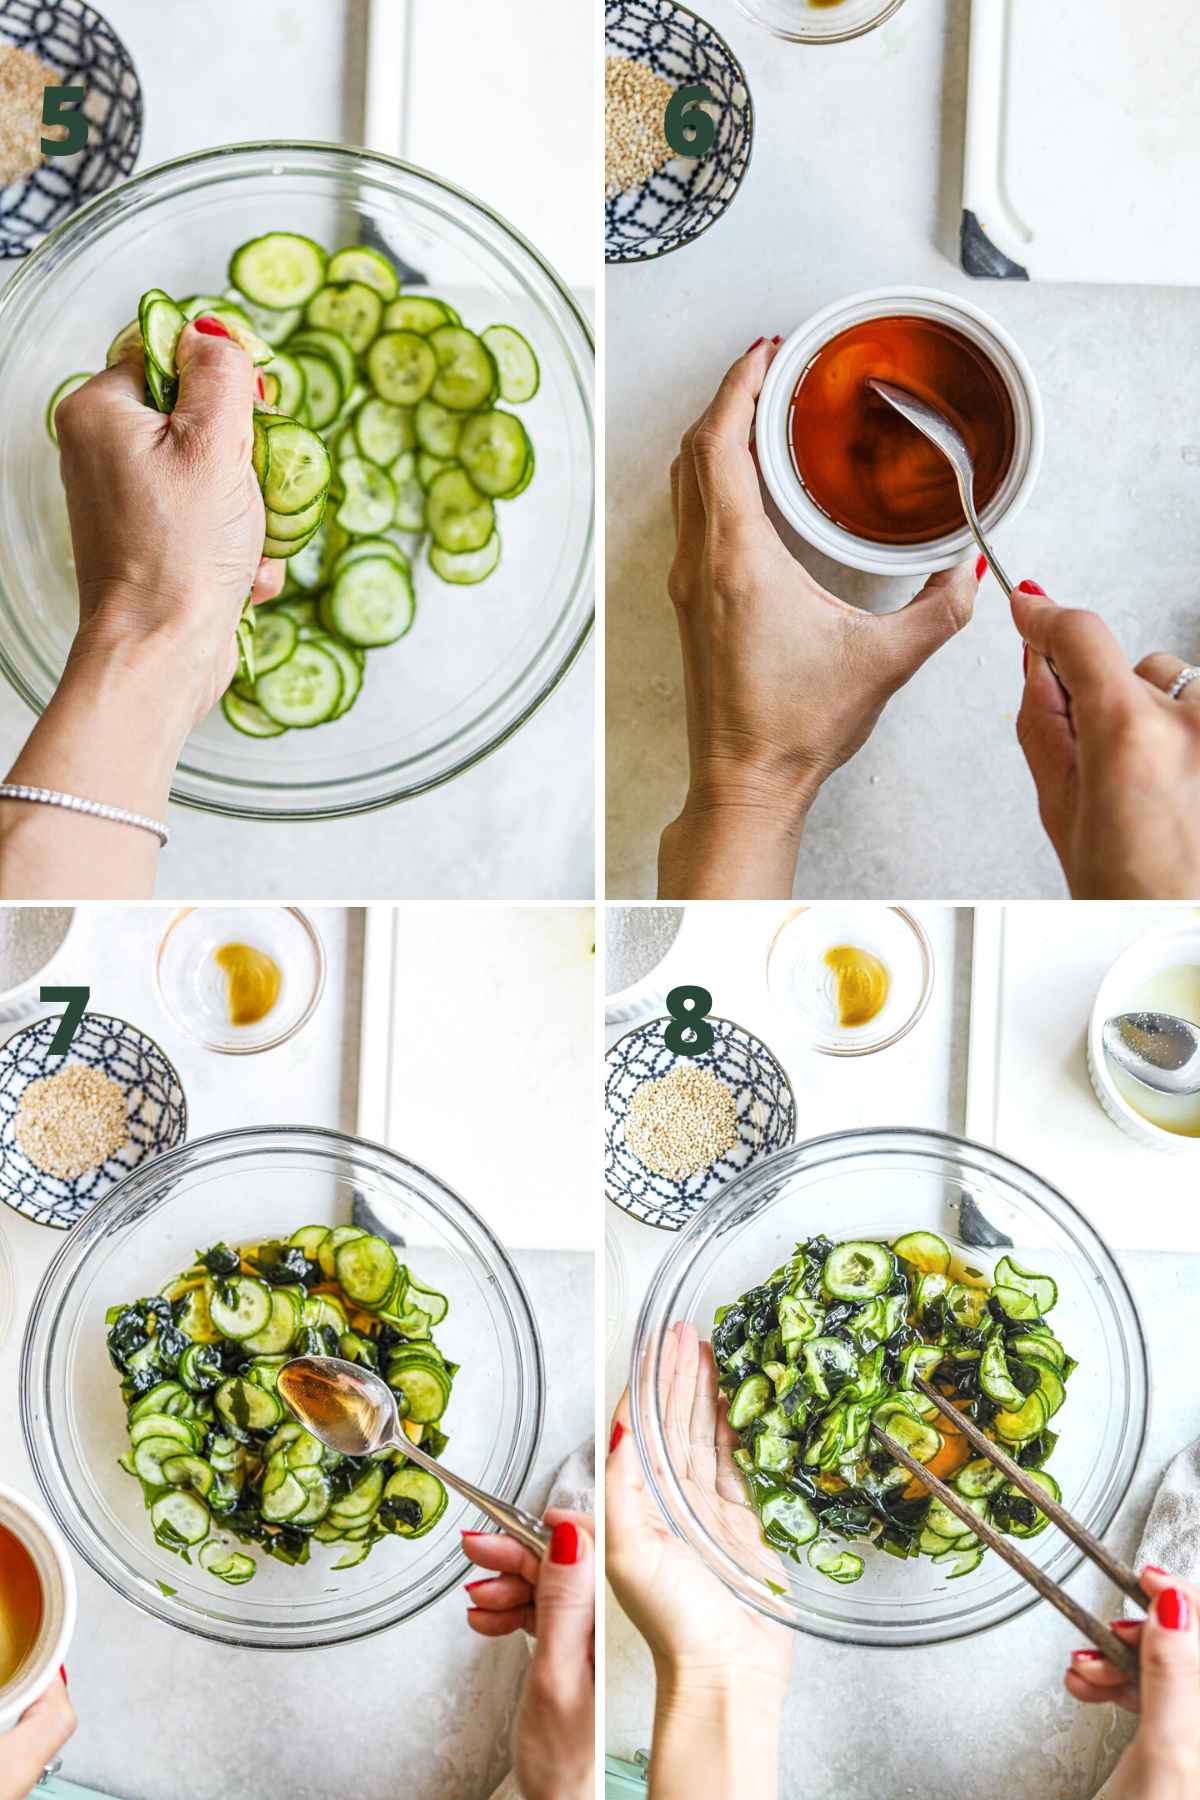 Step to make sunomono (Japanese cucumber salad), squeezing water out of cucumber, mixing vinegar sauce, pouring sauce over cucumber, and mixing with sesame seeds.